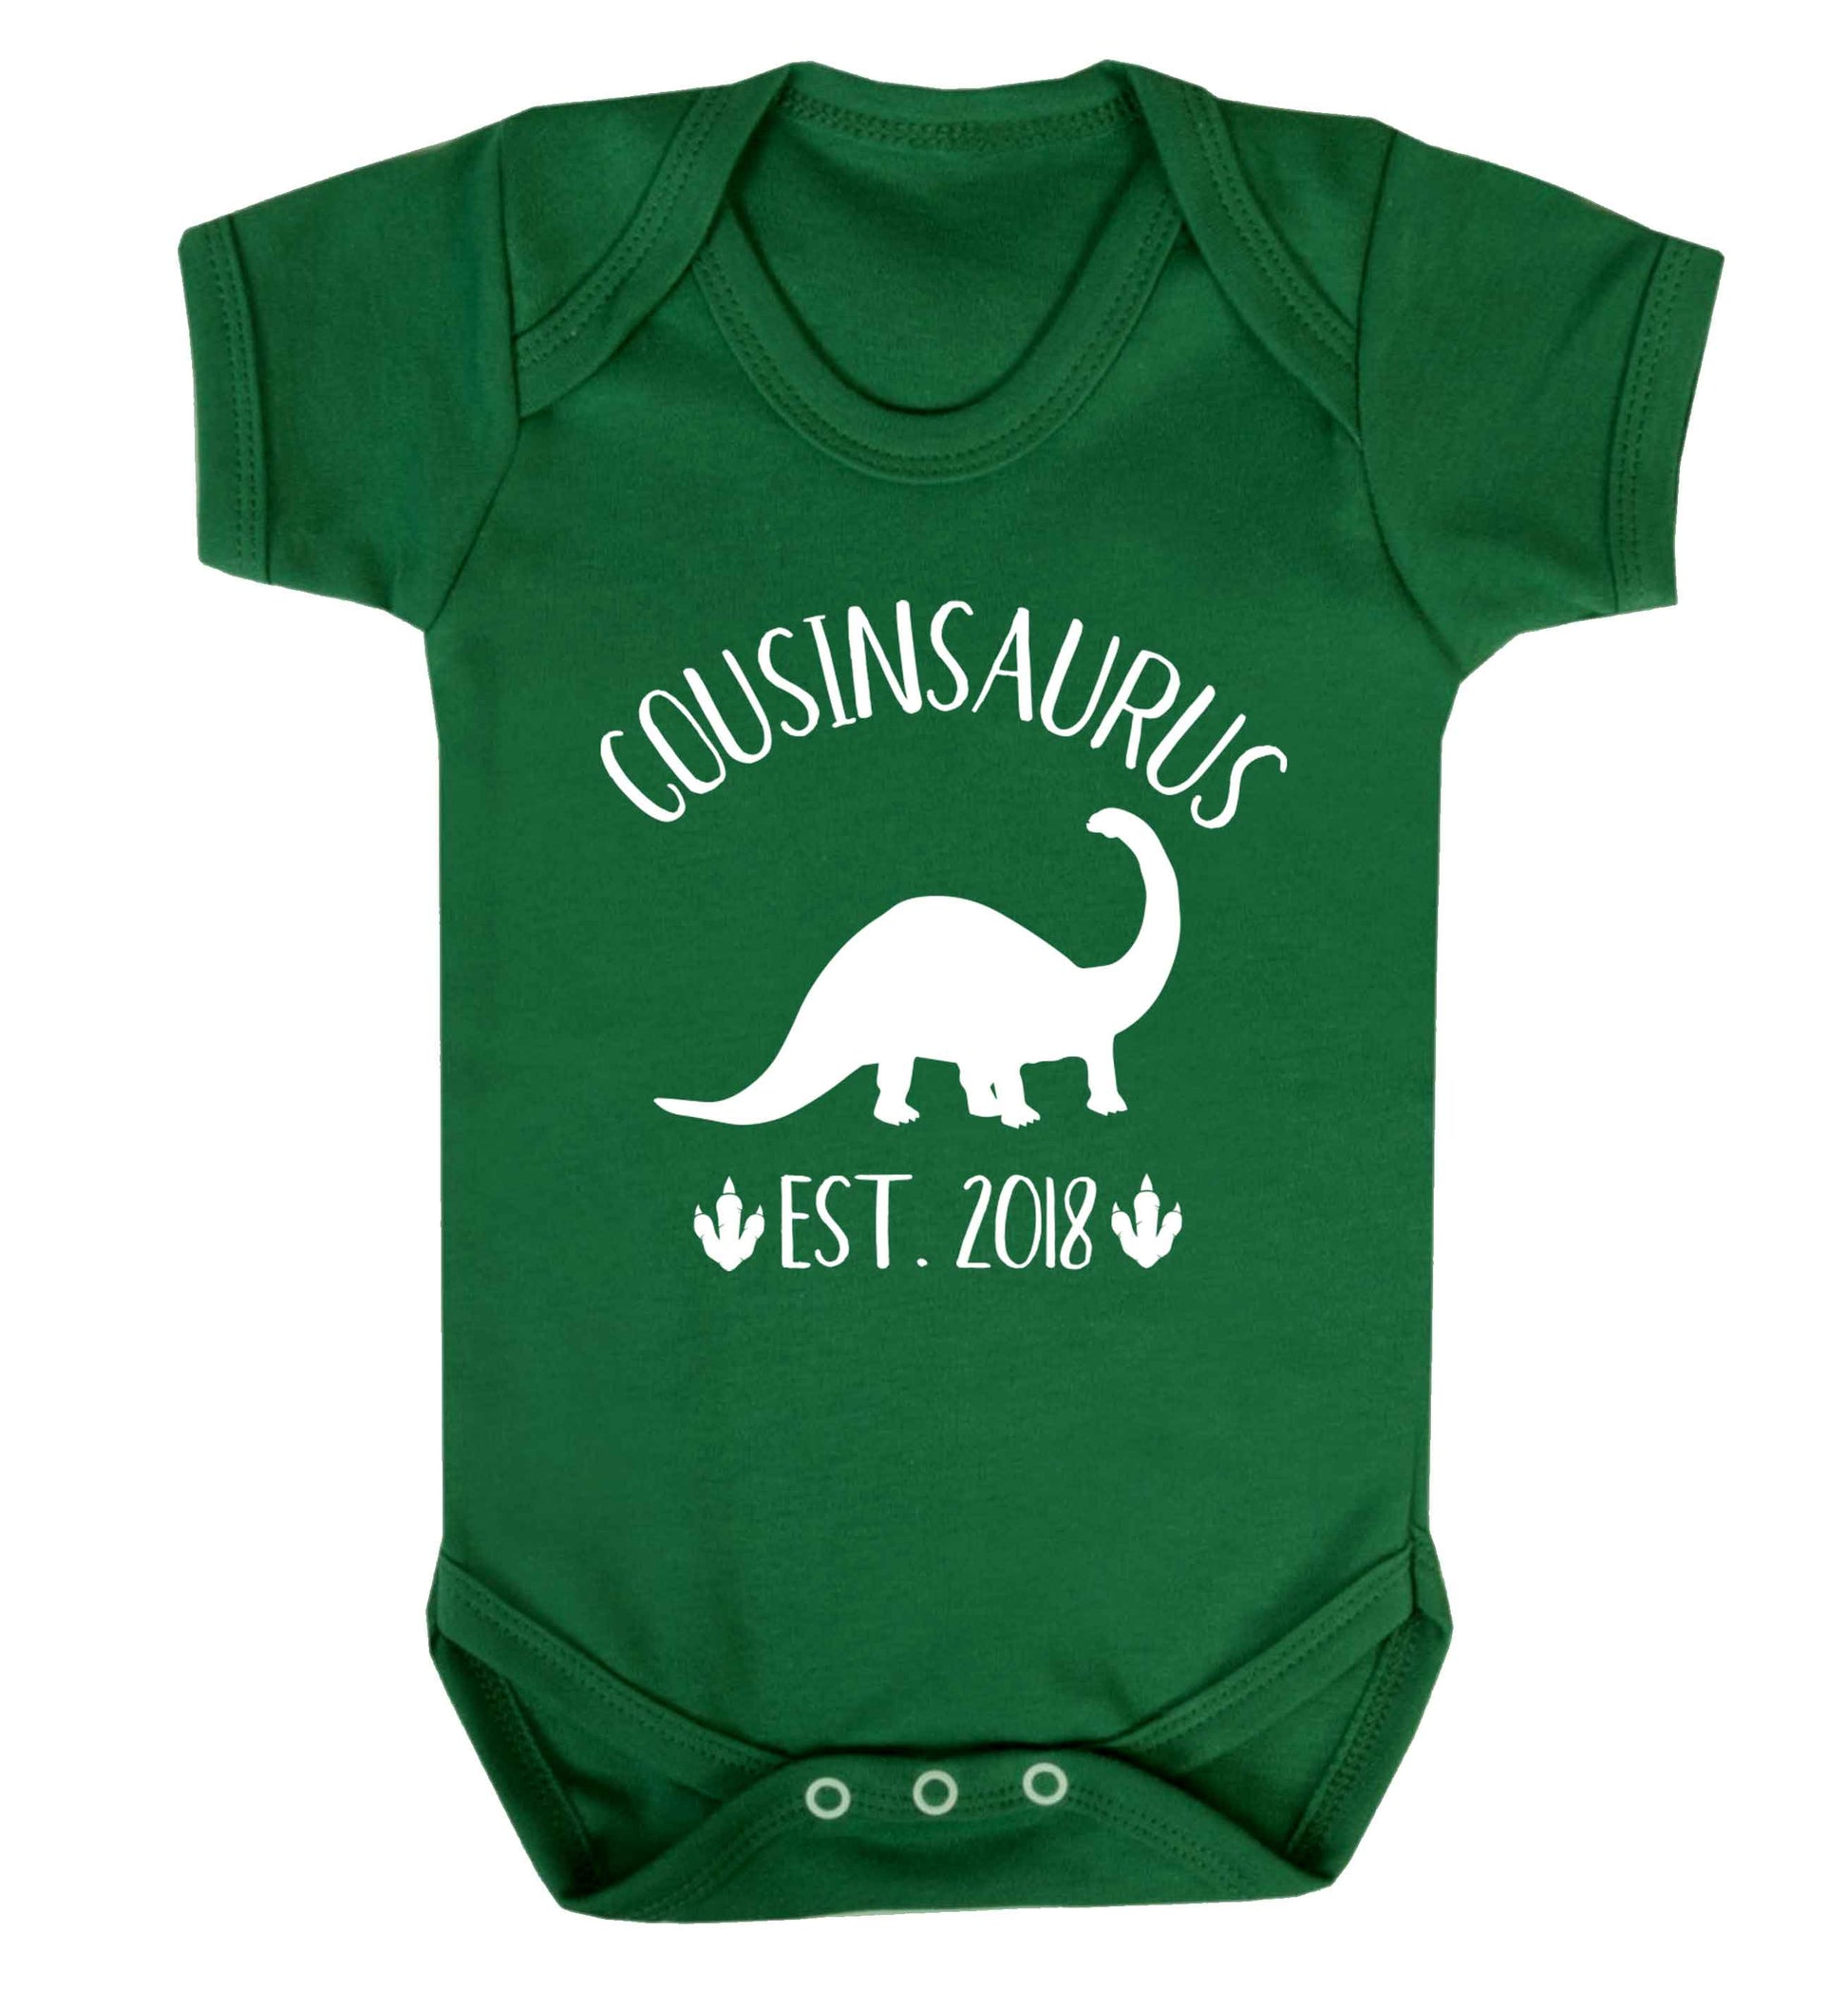 Personalised cousinsaurus since (custom date) Baby Vest green 18-24 months